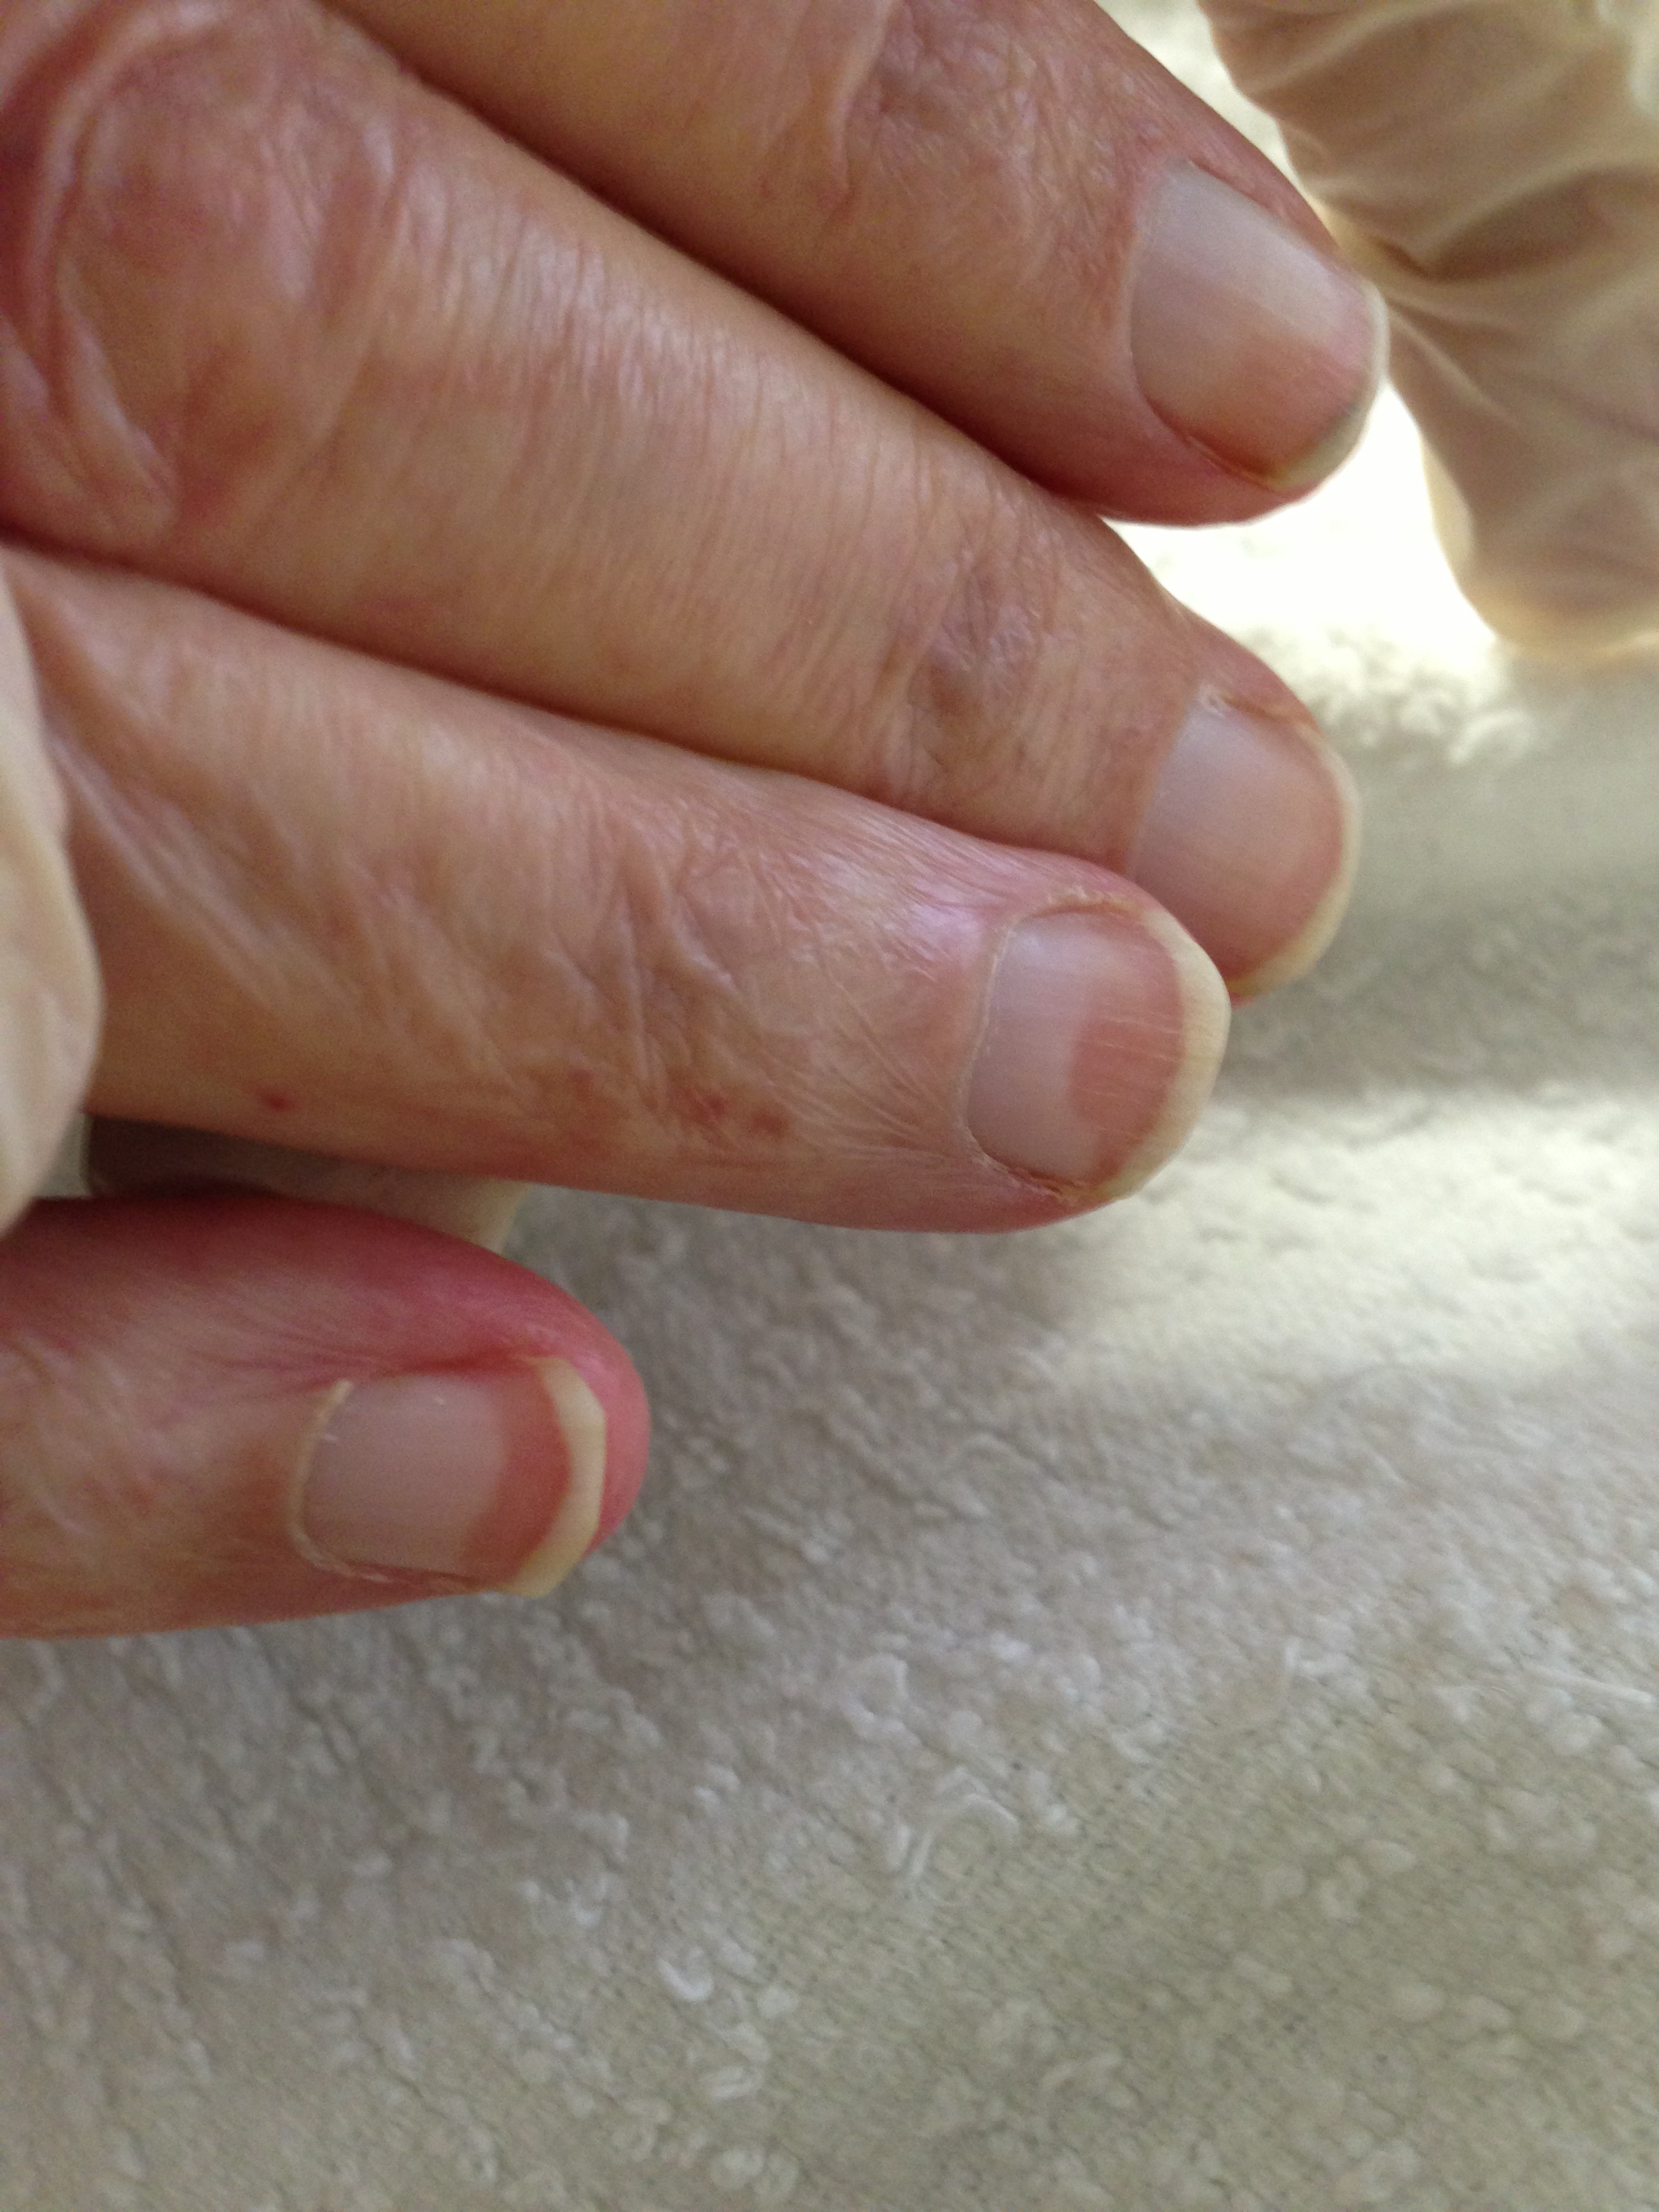 Terry's nails: characteristic "ground glass" appearance, with no lunula.